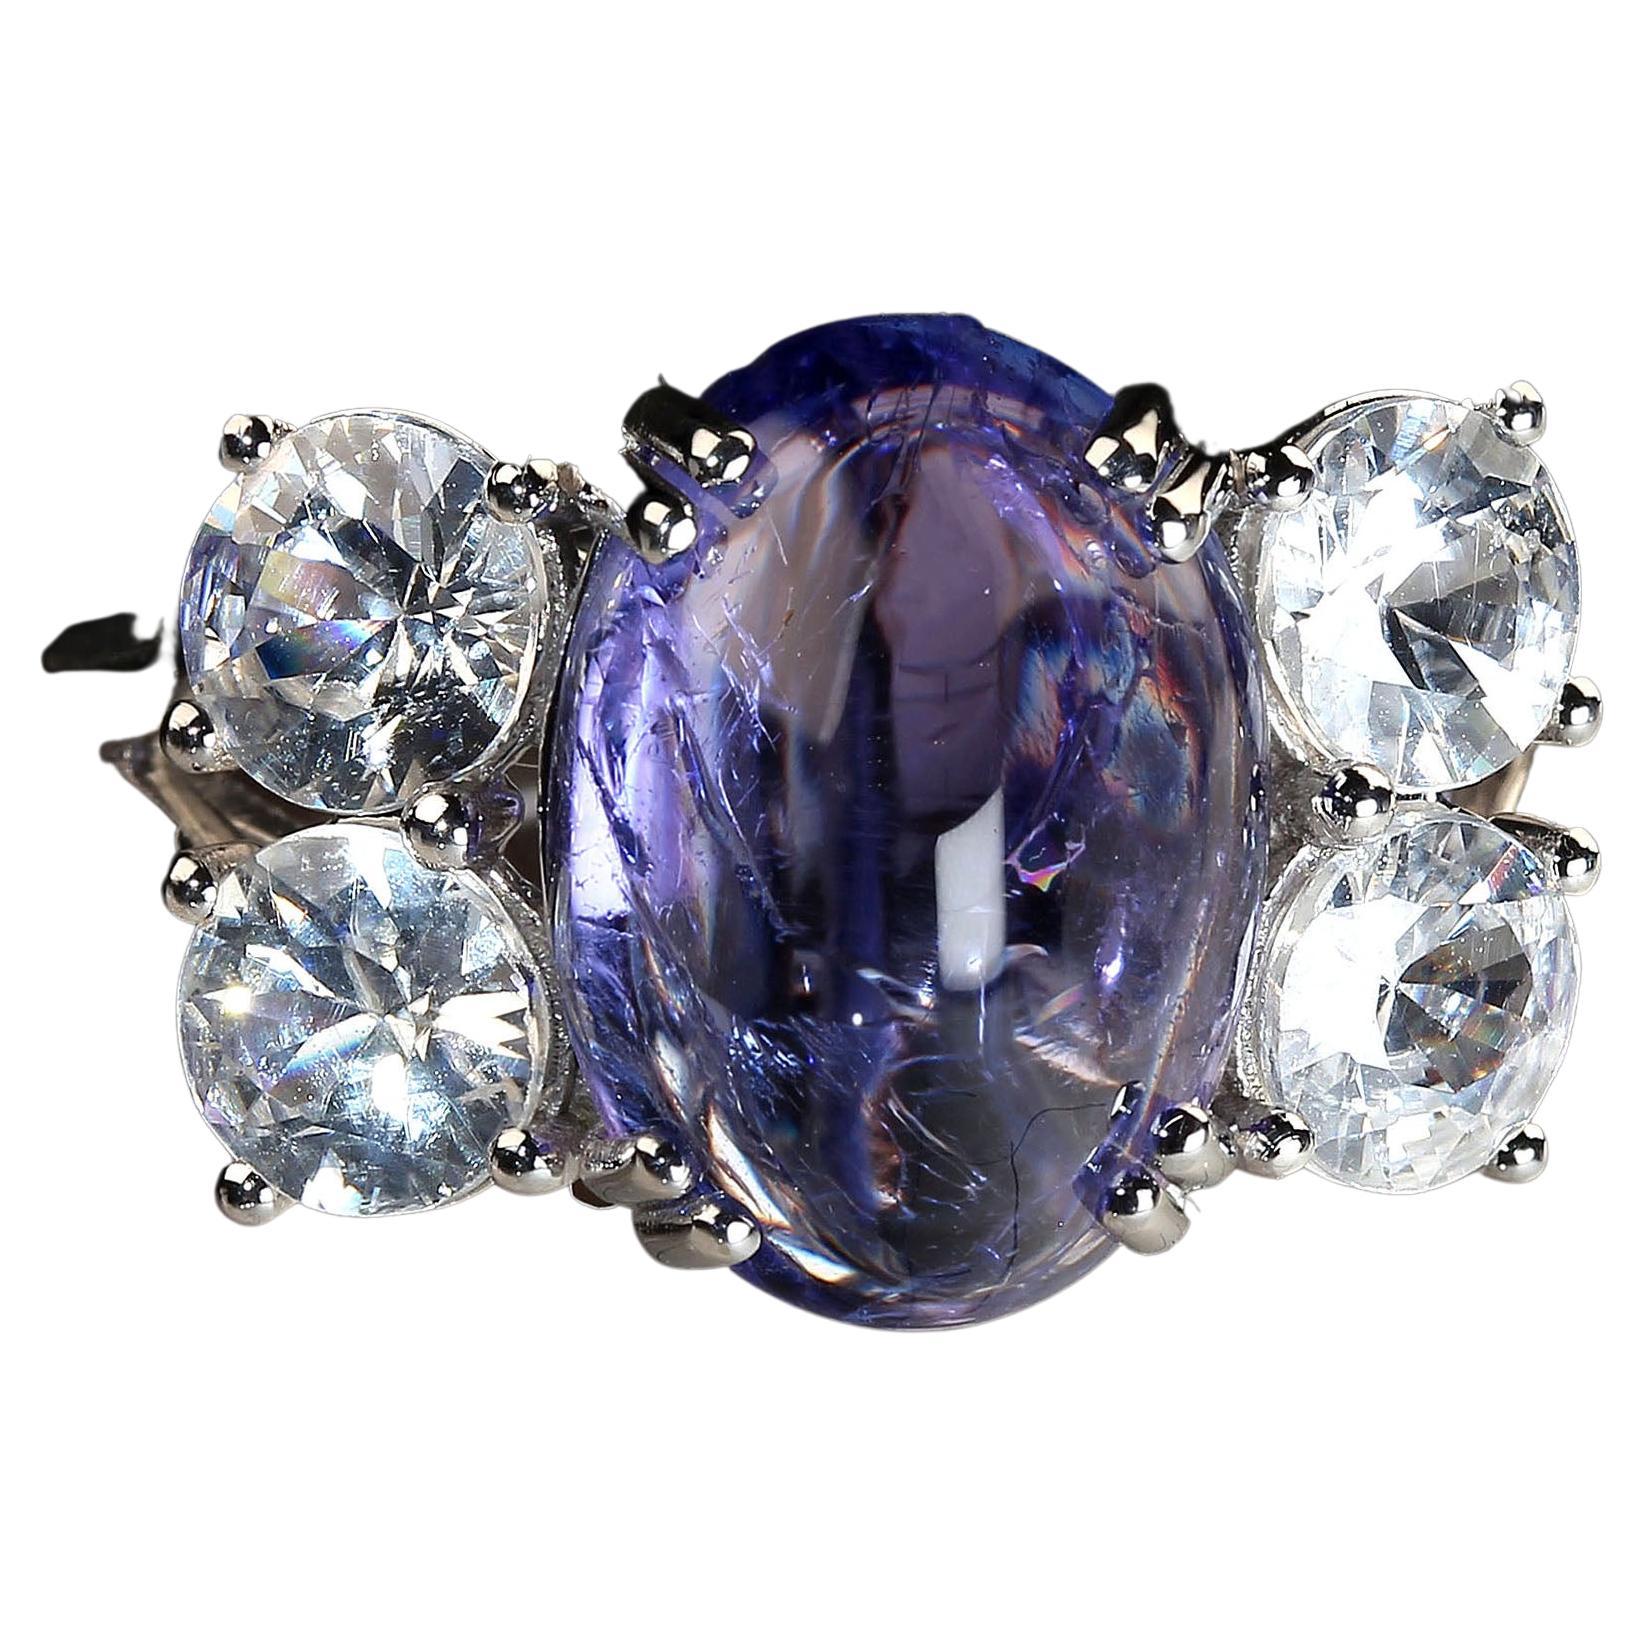 AJD Dinner Ring of Cabochon Tanzanite and Sparkling Cambodian Zircons